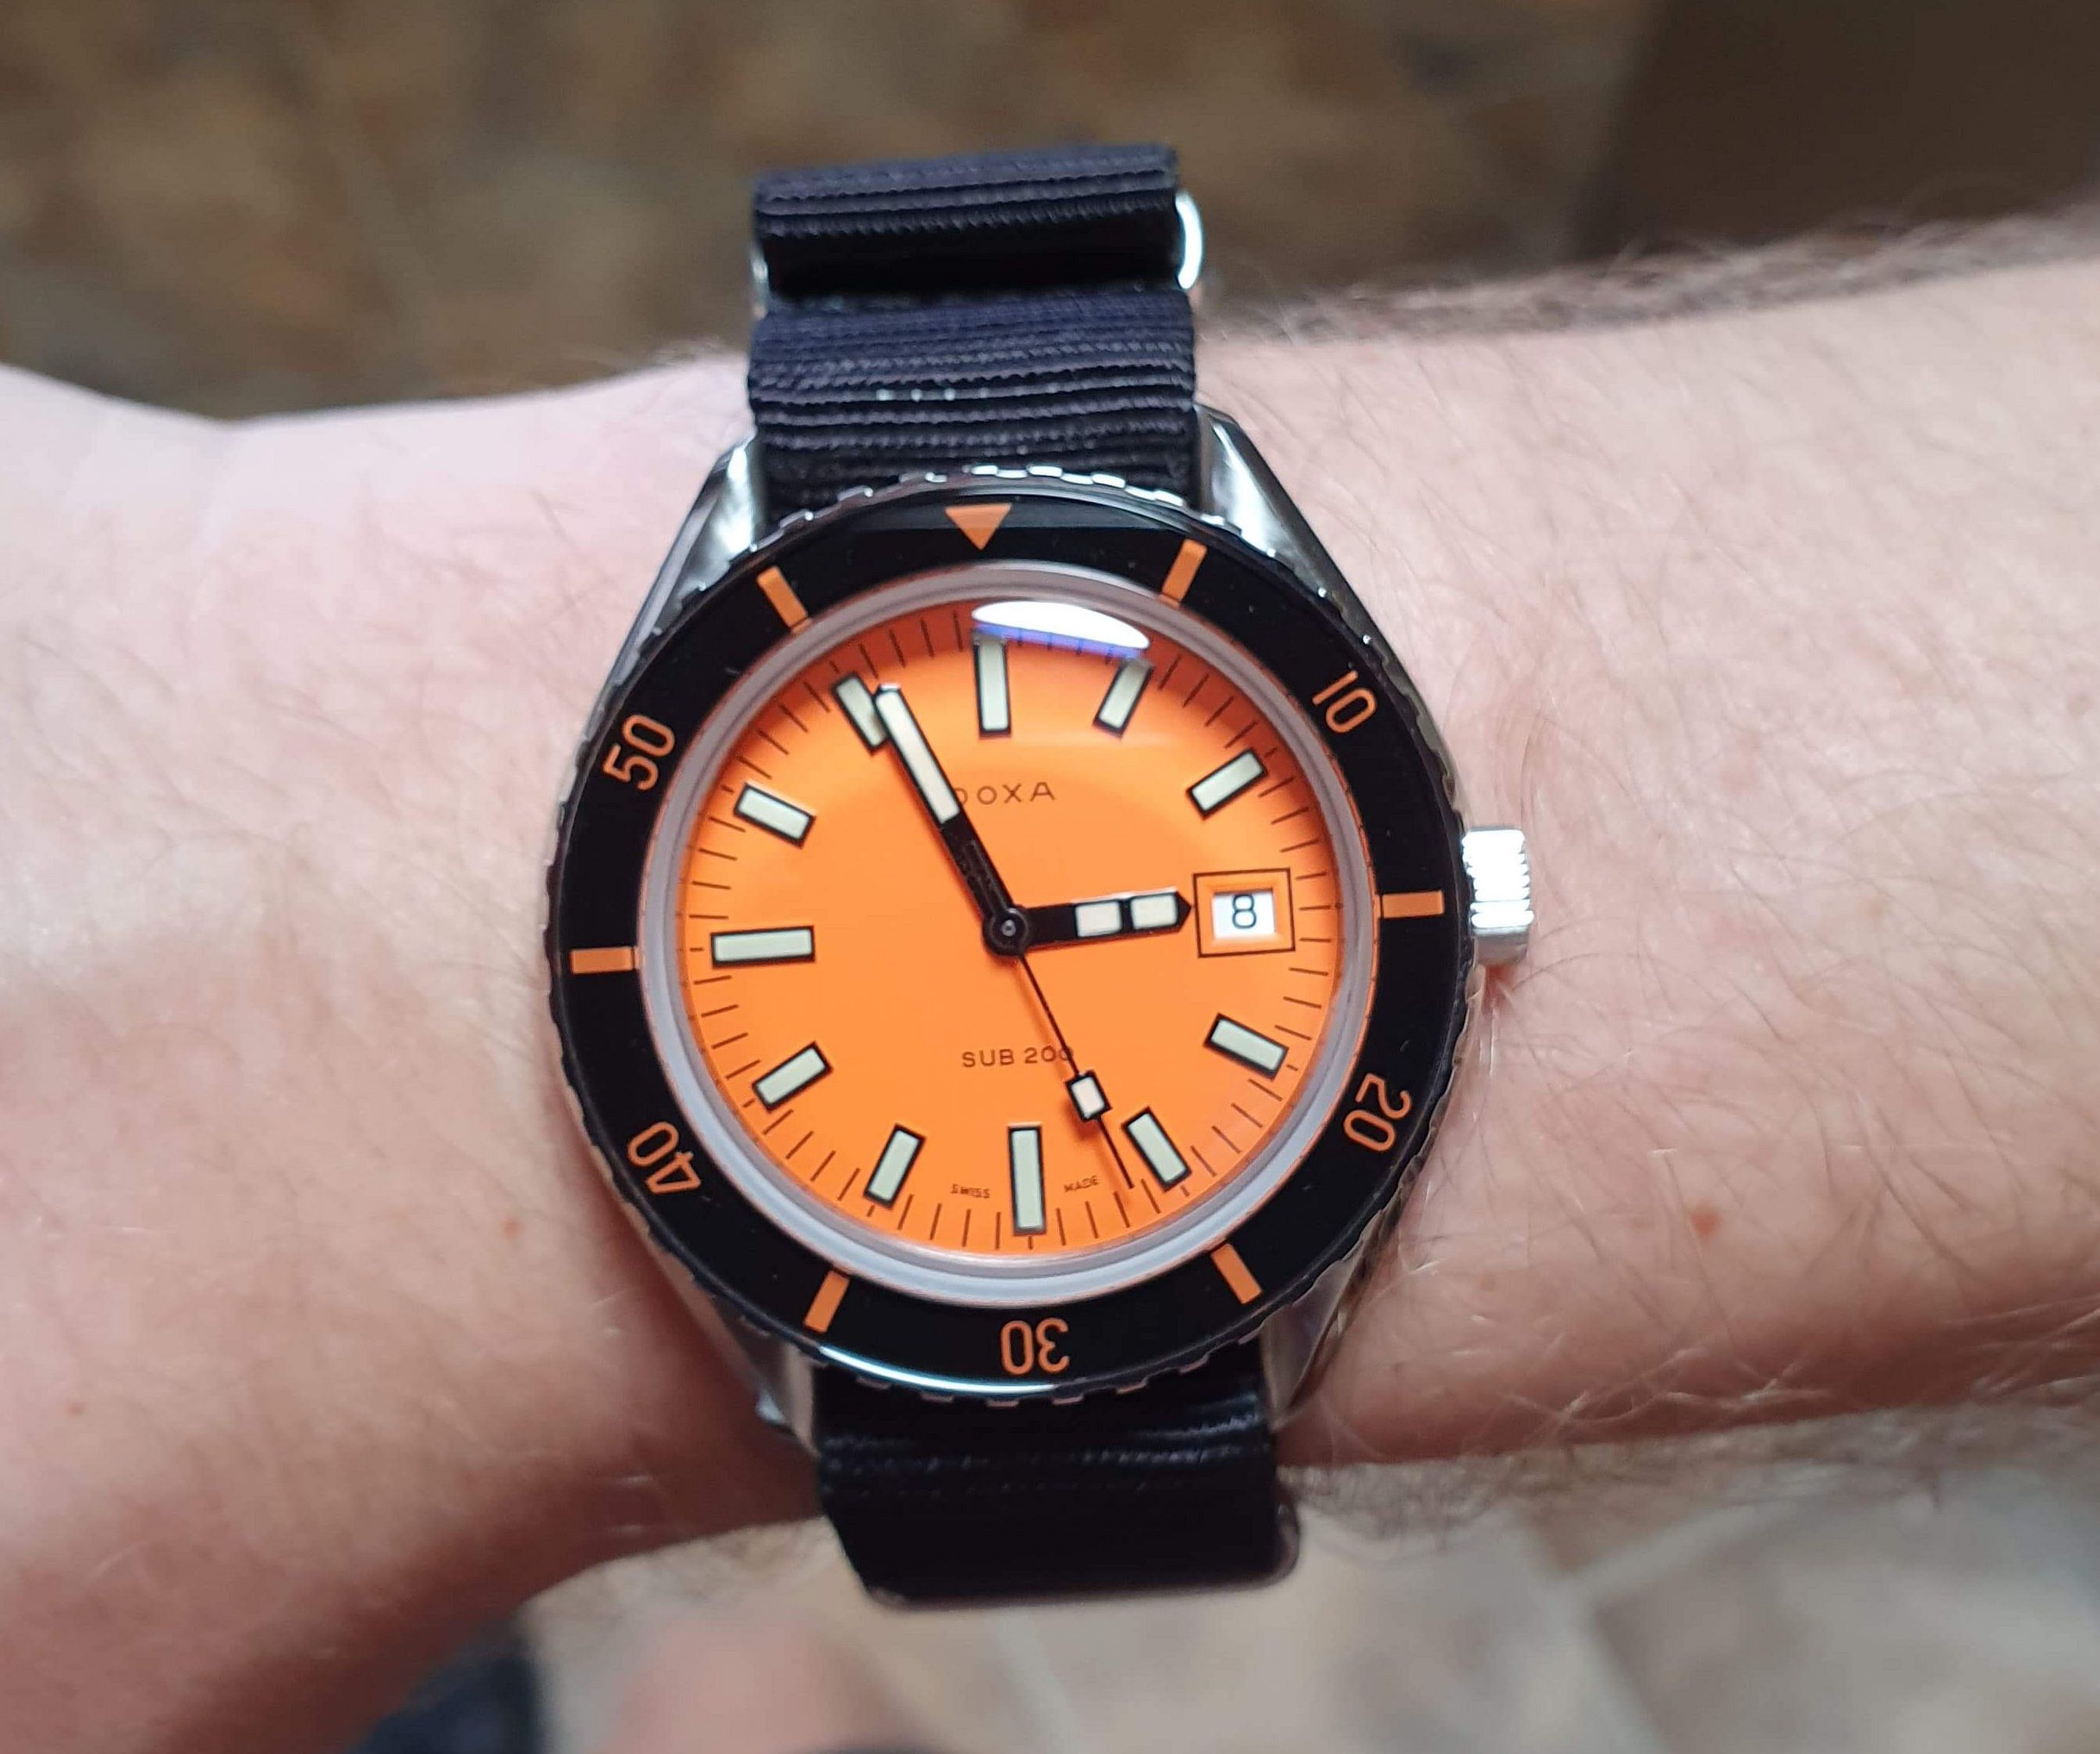 Weekend watch spotting with JR: Labour Day edition